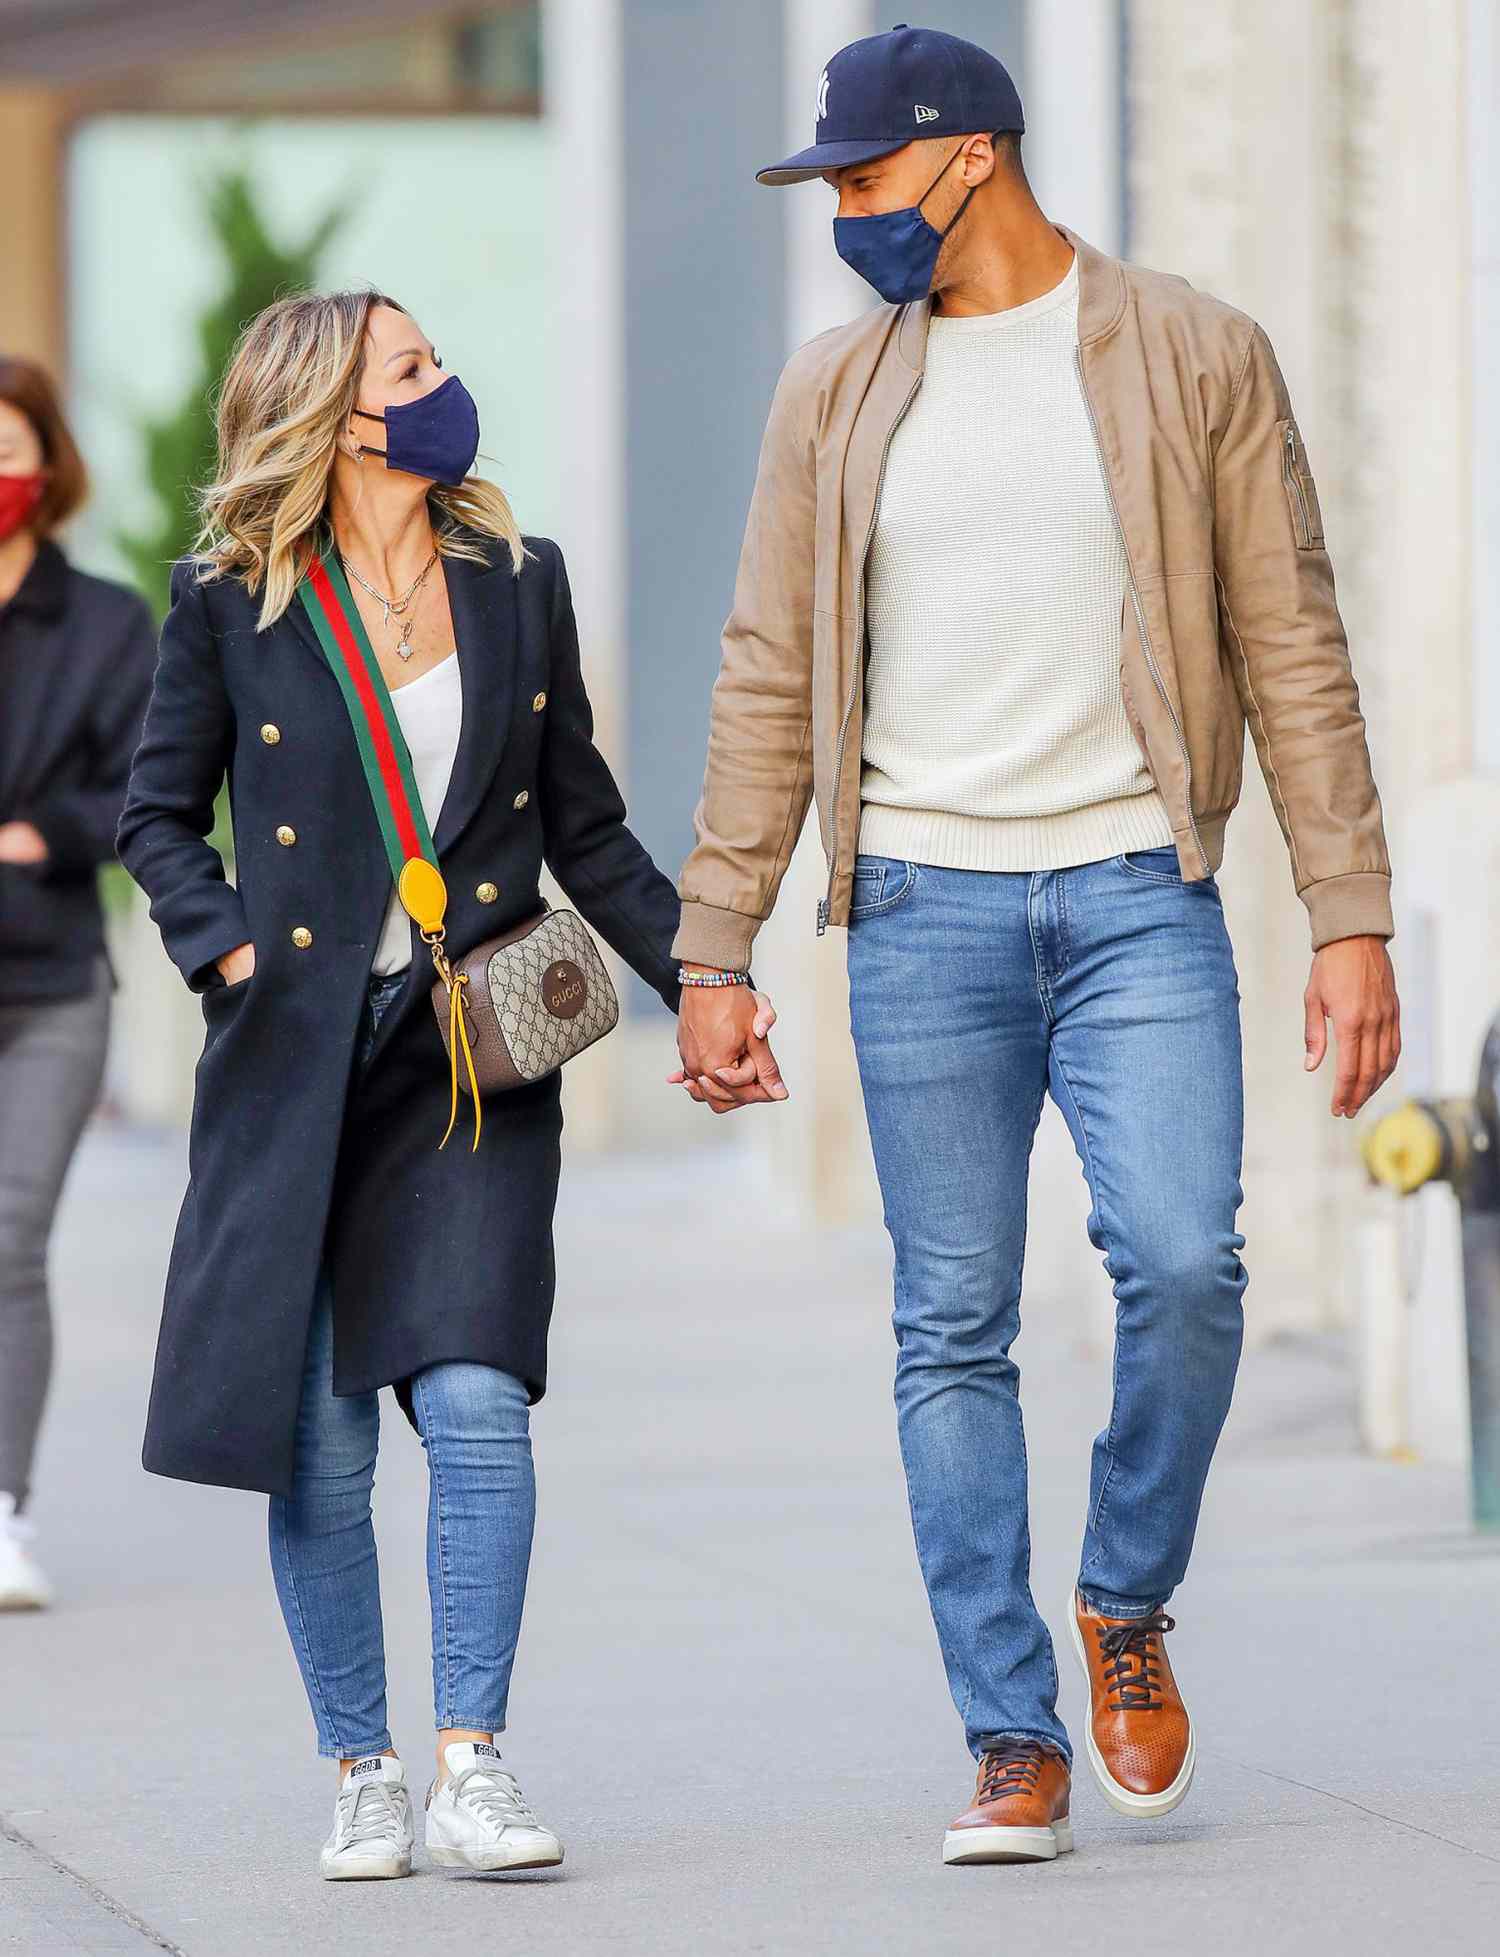 Clare Crawley And Dale Moss Enjoy A Romantic Stroll In NYC